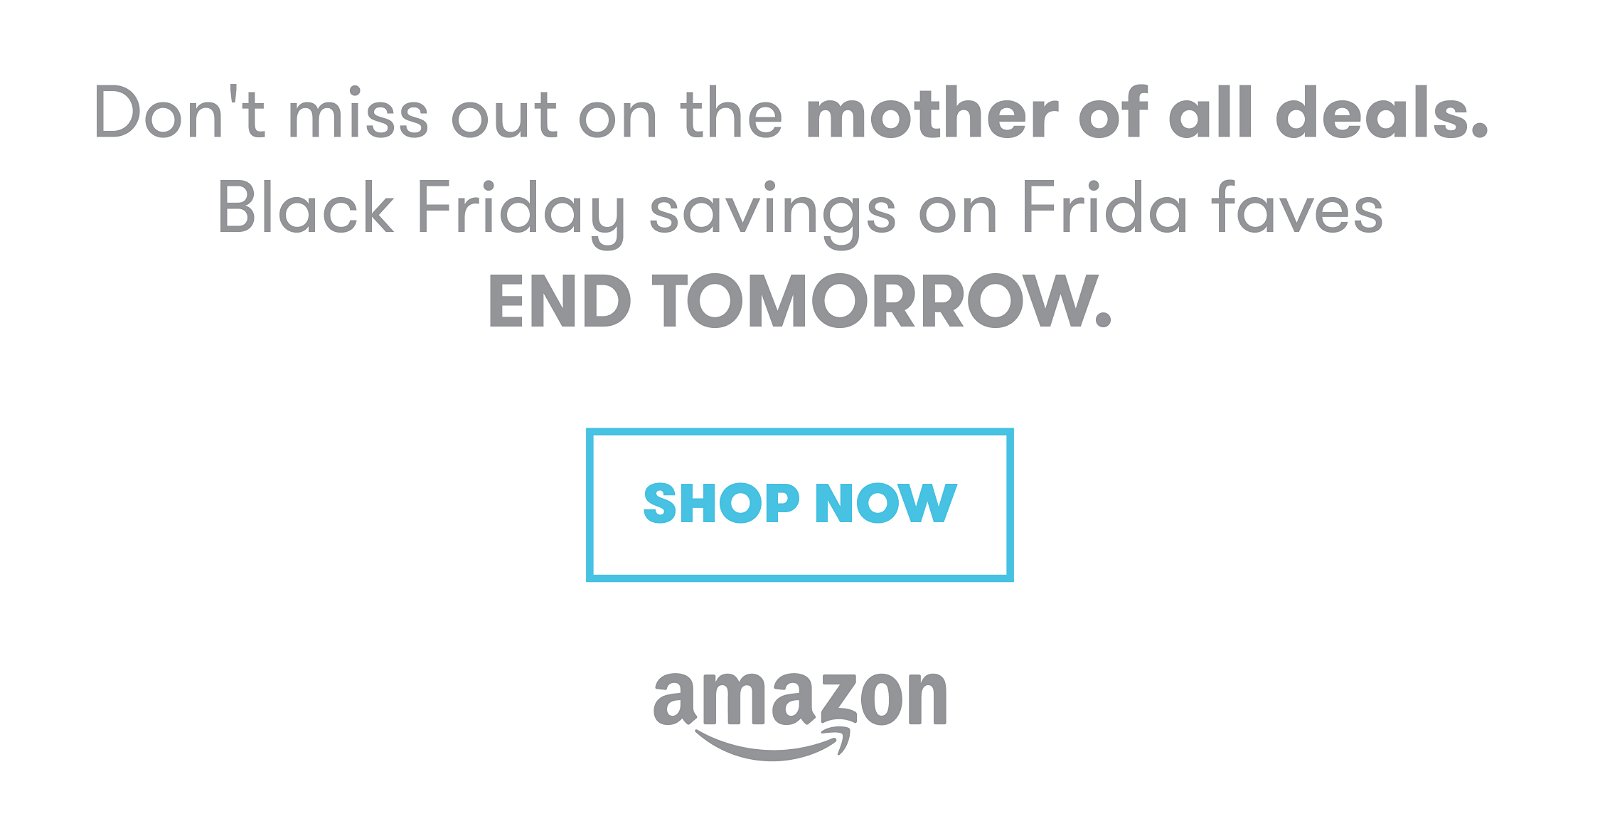 Save 30% or more on Frida faves on Amazon